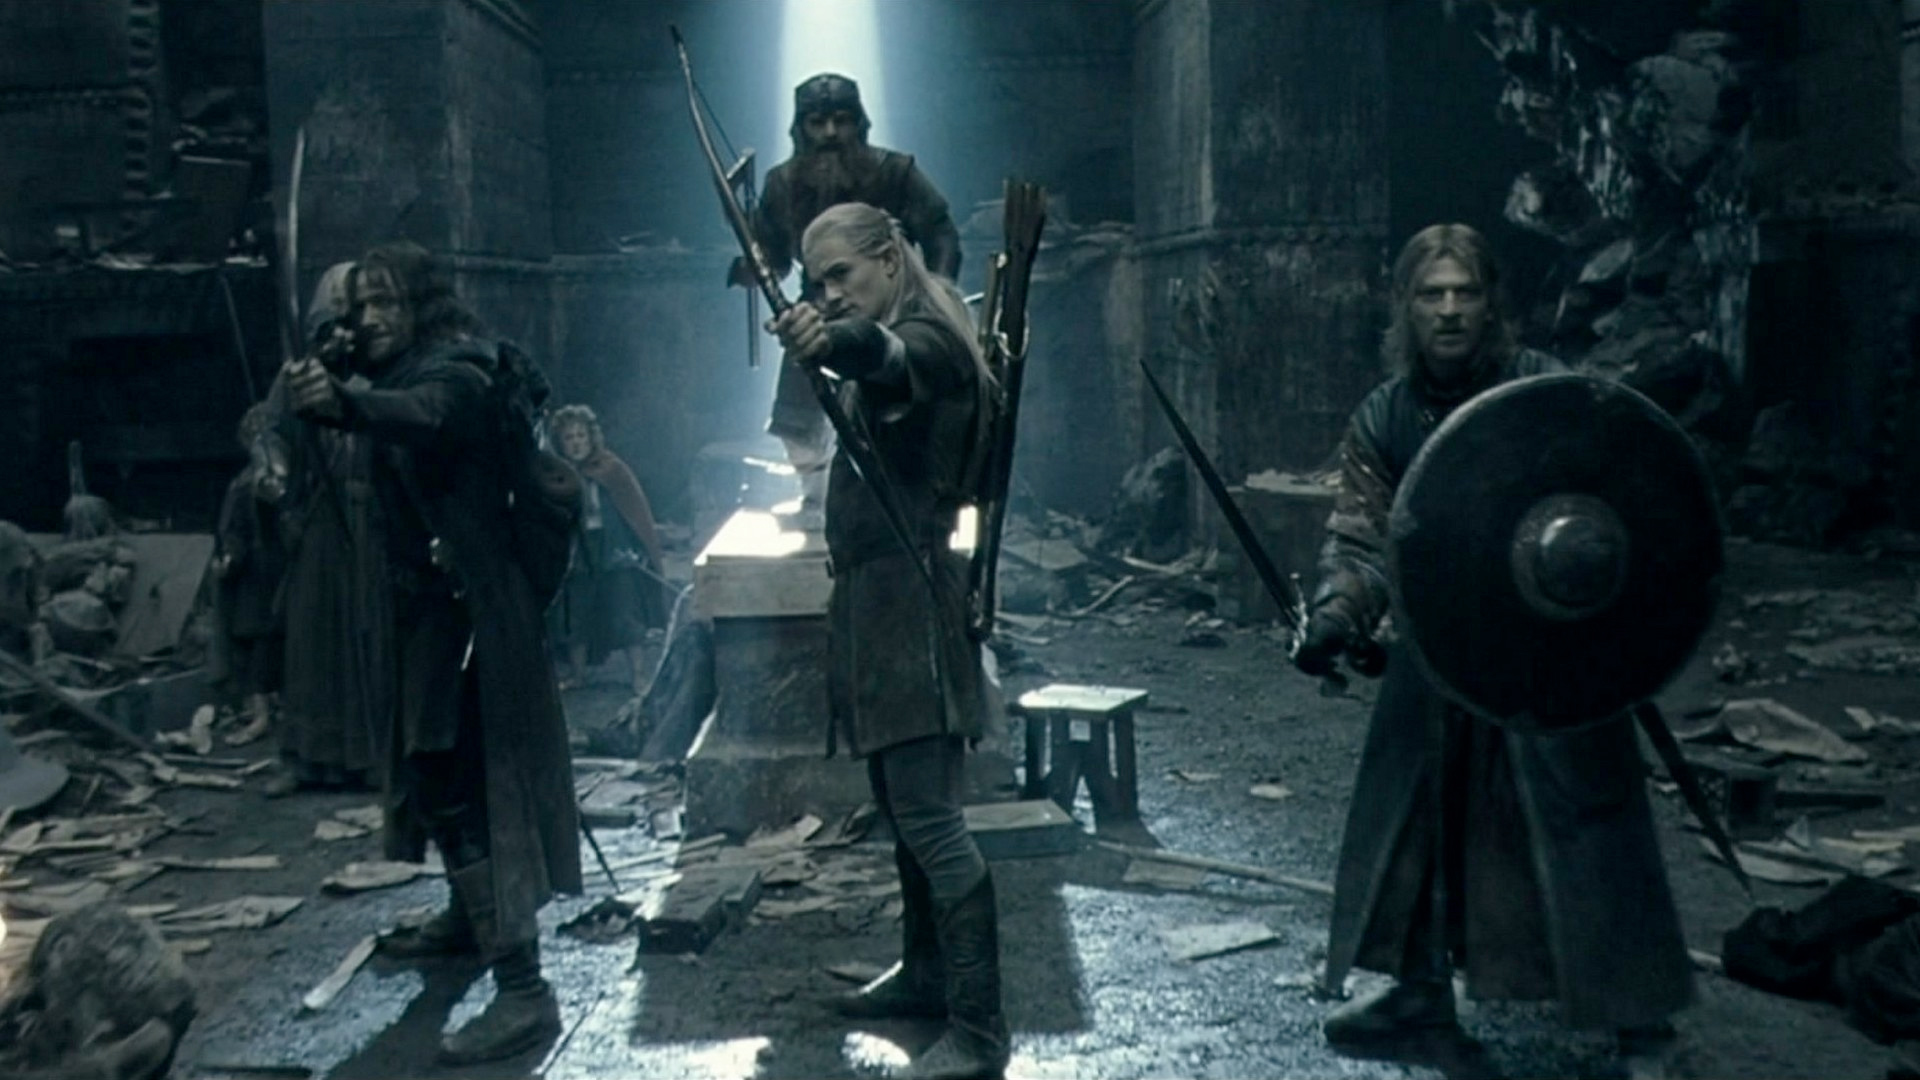 The Fellowship of the Ring make a stand in the Mines of Moria